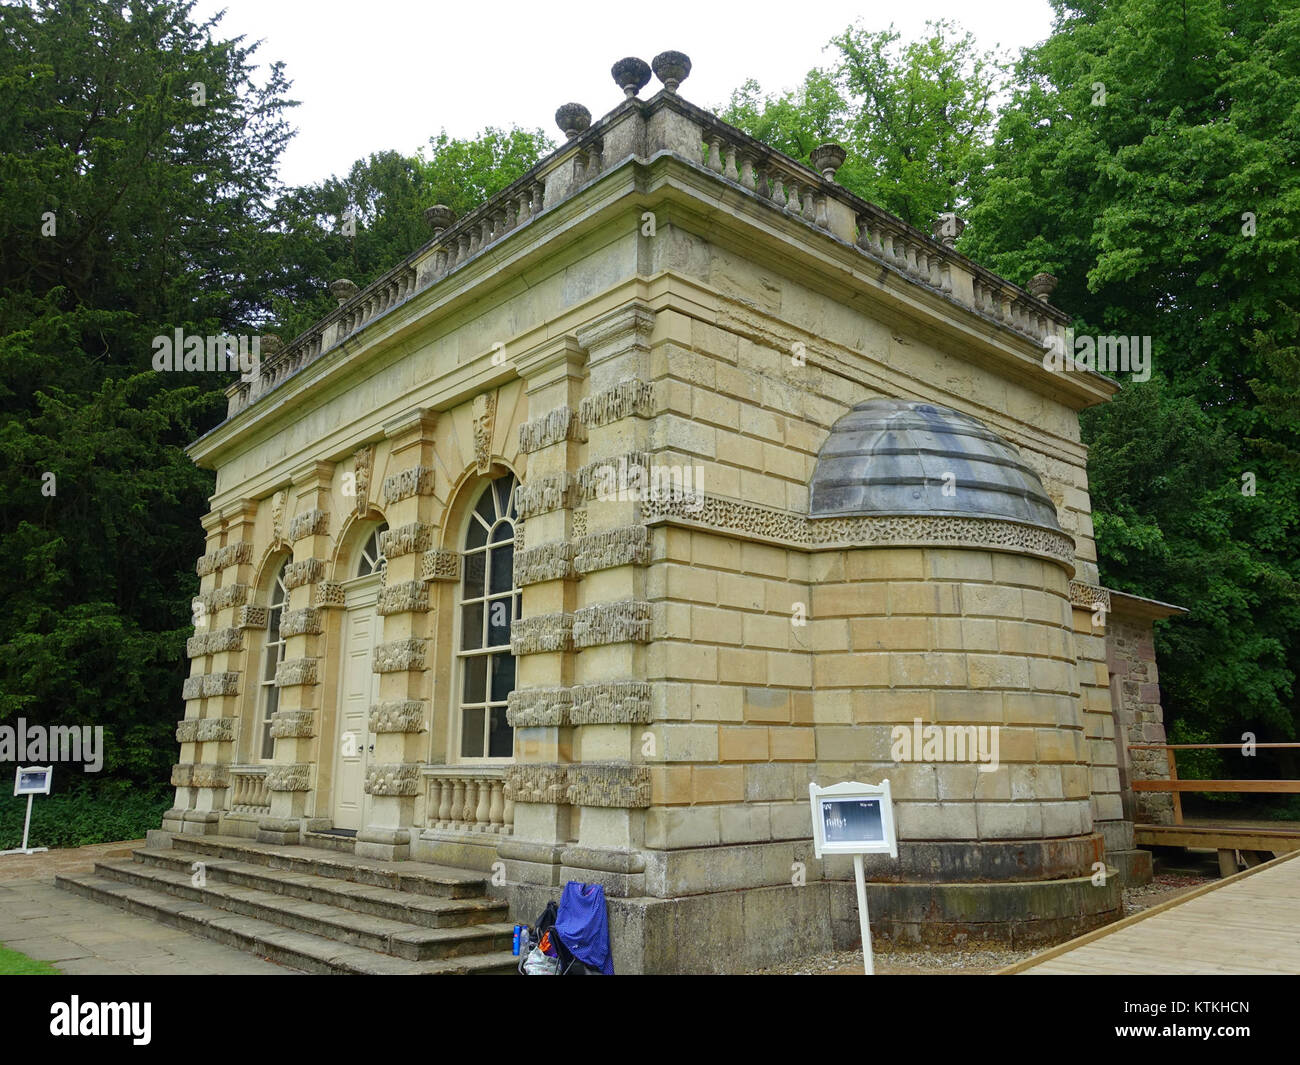 Banqueting House, Studley Royal Park   North Yorkshire, England   DSC00730 Stock Photo